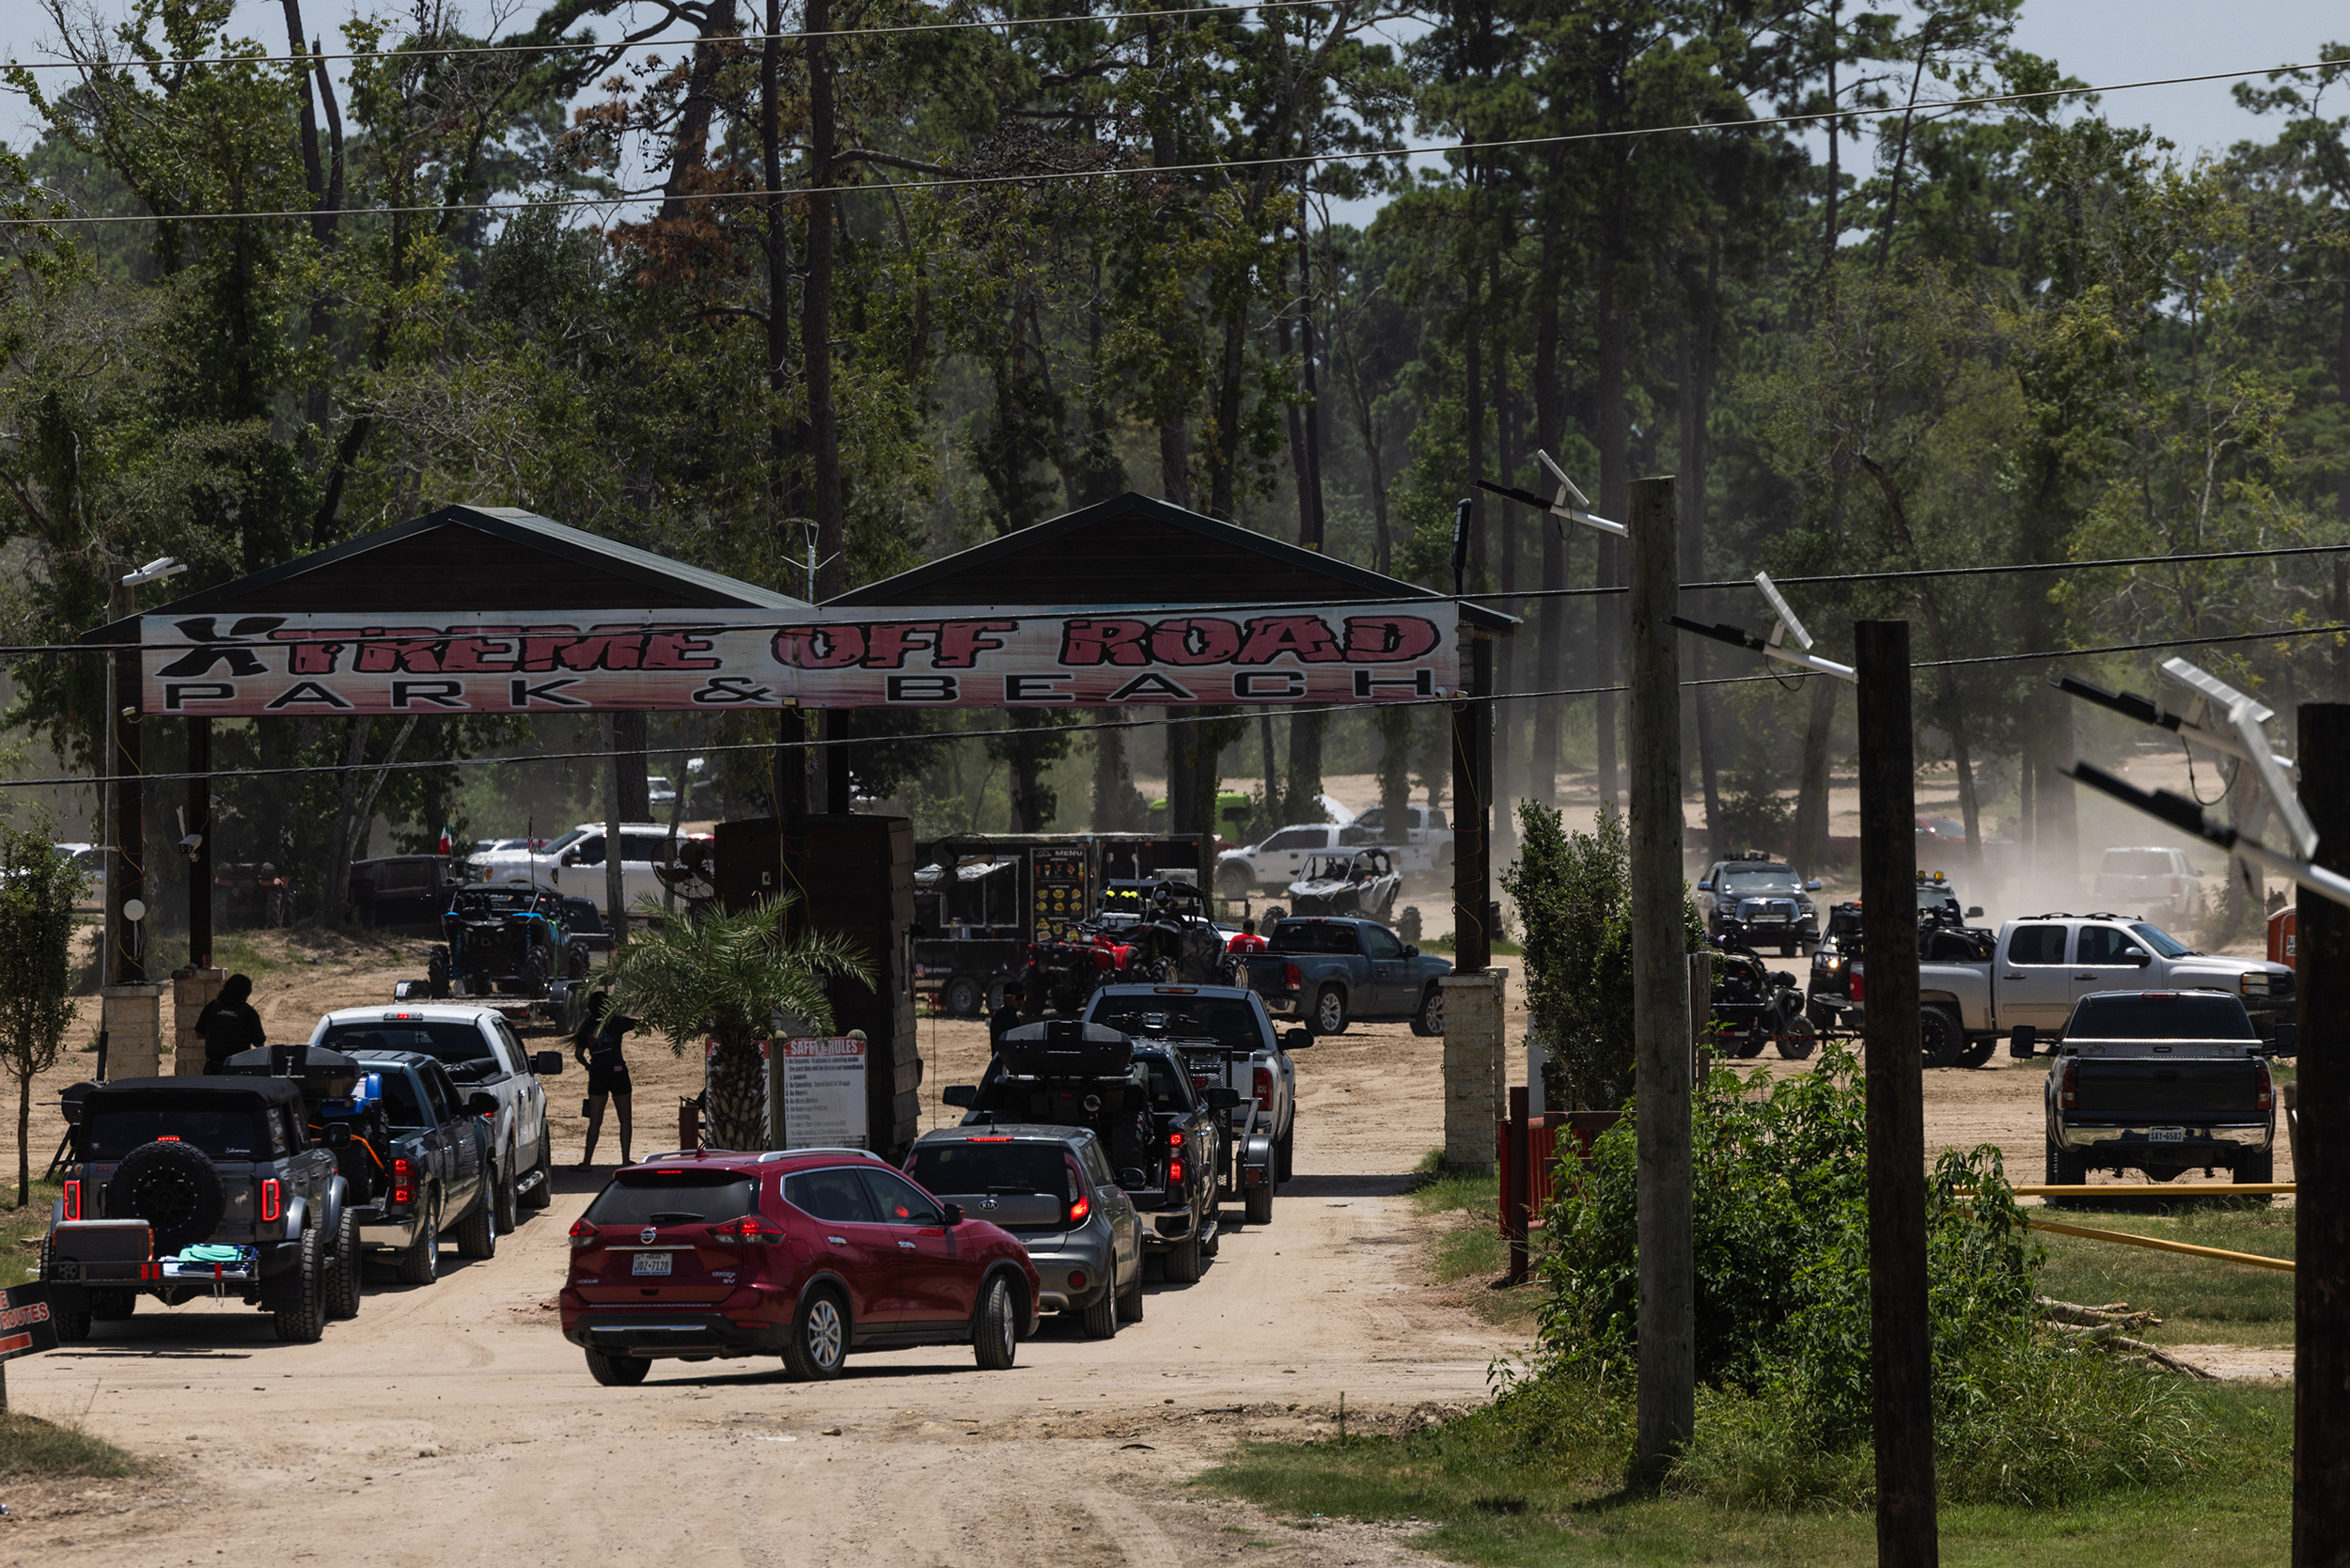 Vehicles wait for their turn to enter Xtreme Off Road Park & Beach near Crosby.